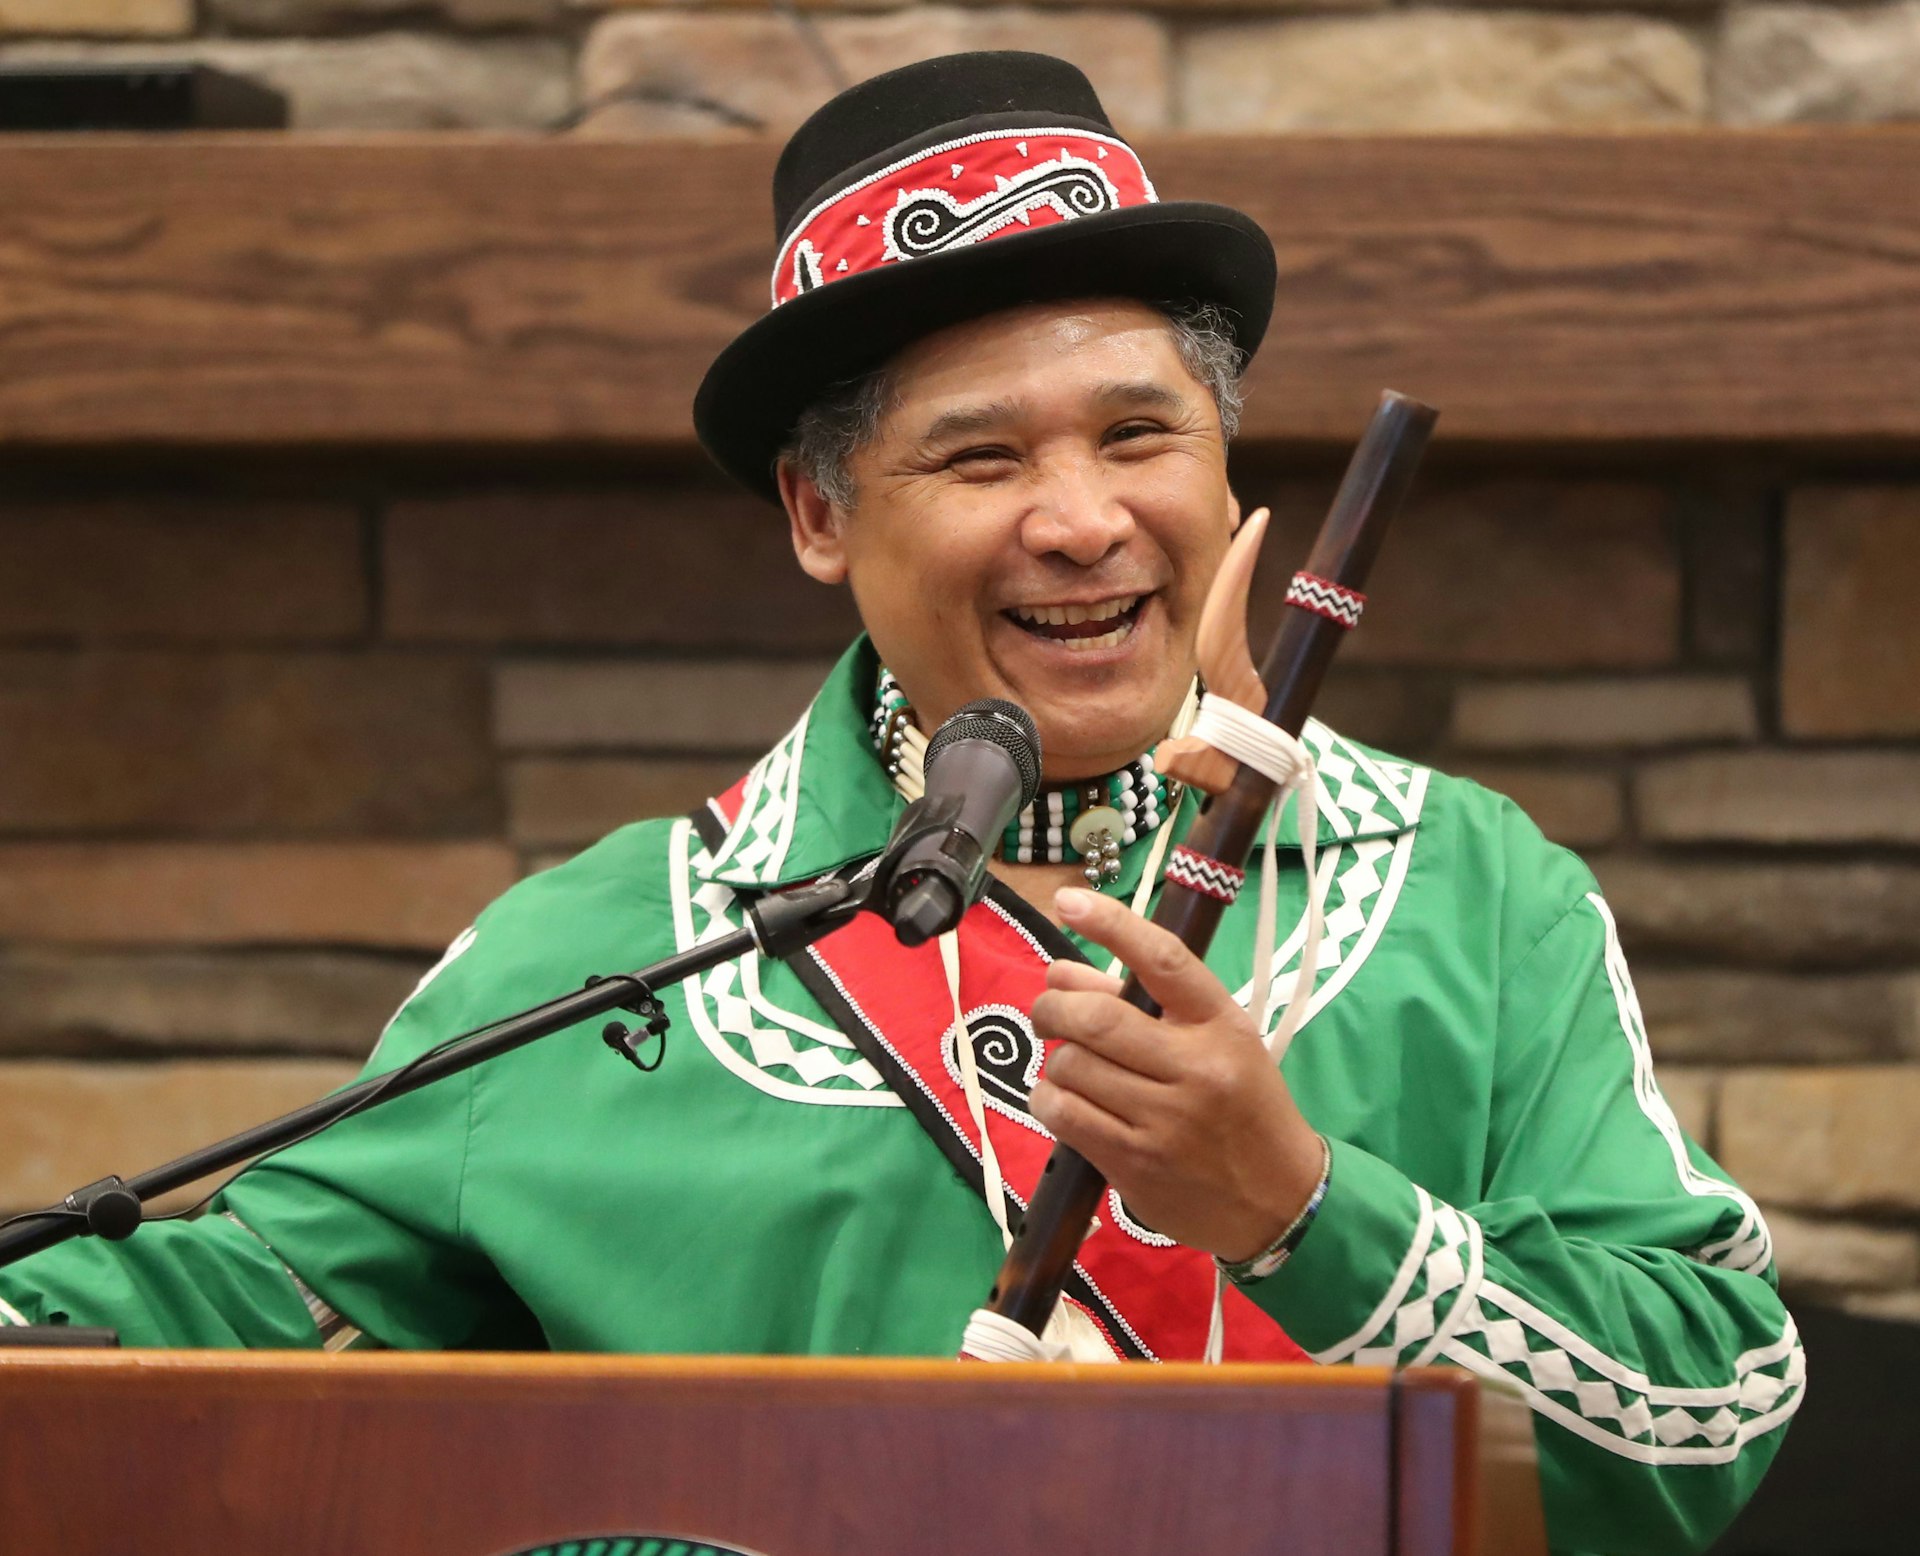 Choctaw flute maker Pesley Byington talks about a bamboo flute he made for Taoiseach Leo Varadkar at the Choctaw tribal council in the Main Hall in Oaklahoma on day two of his week long visit to the United States of America.